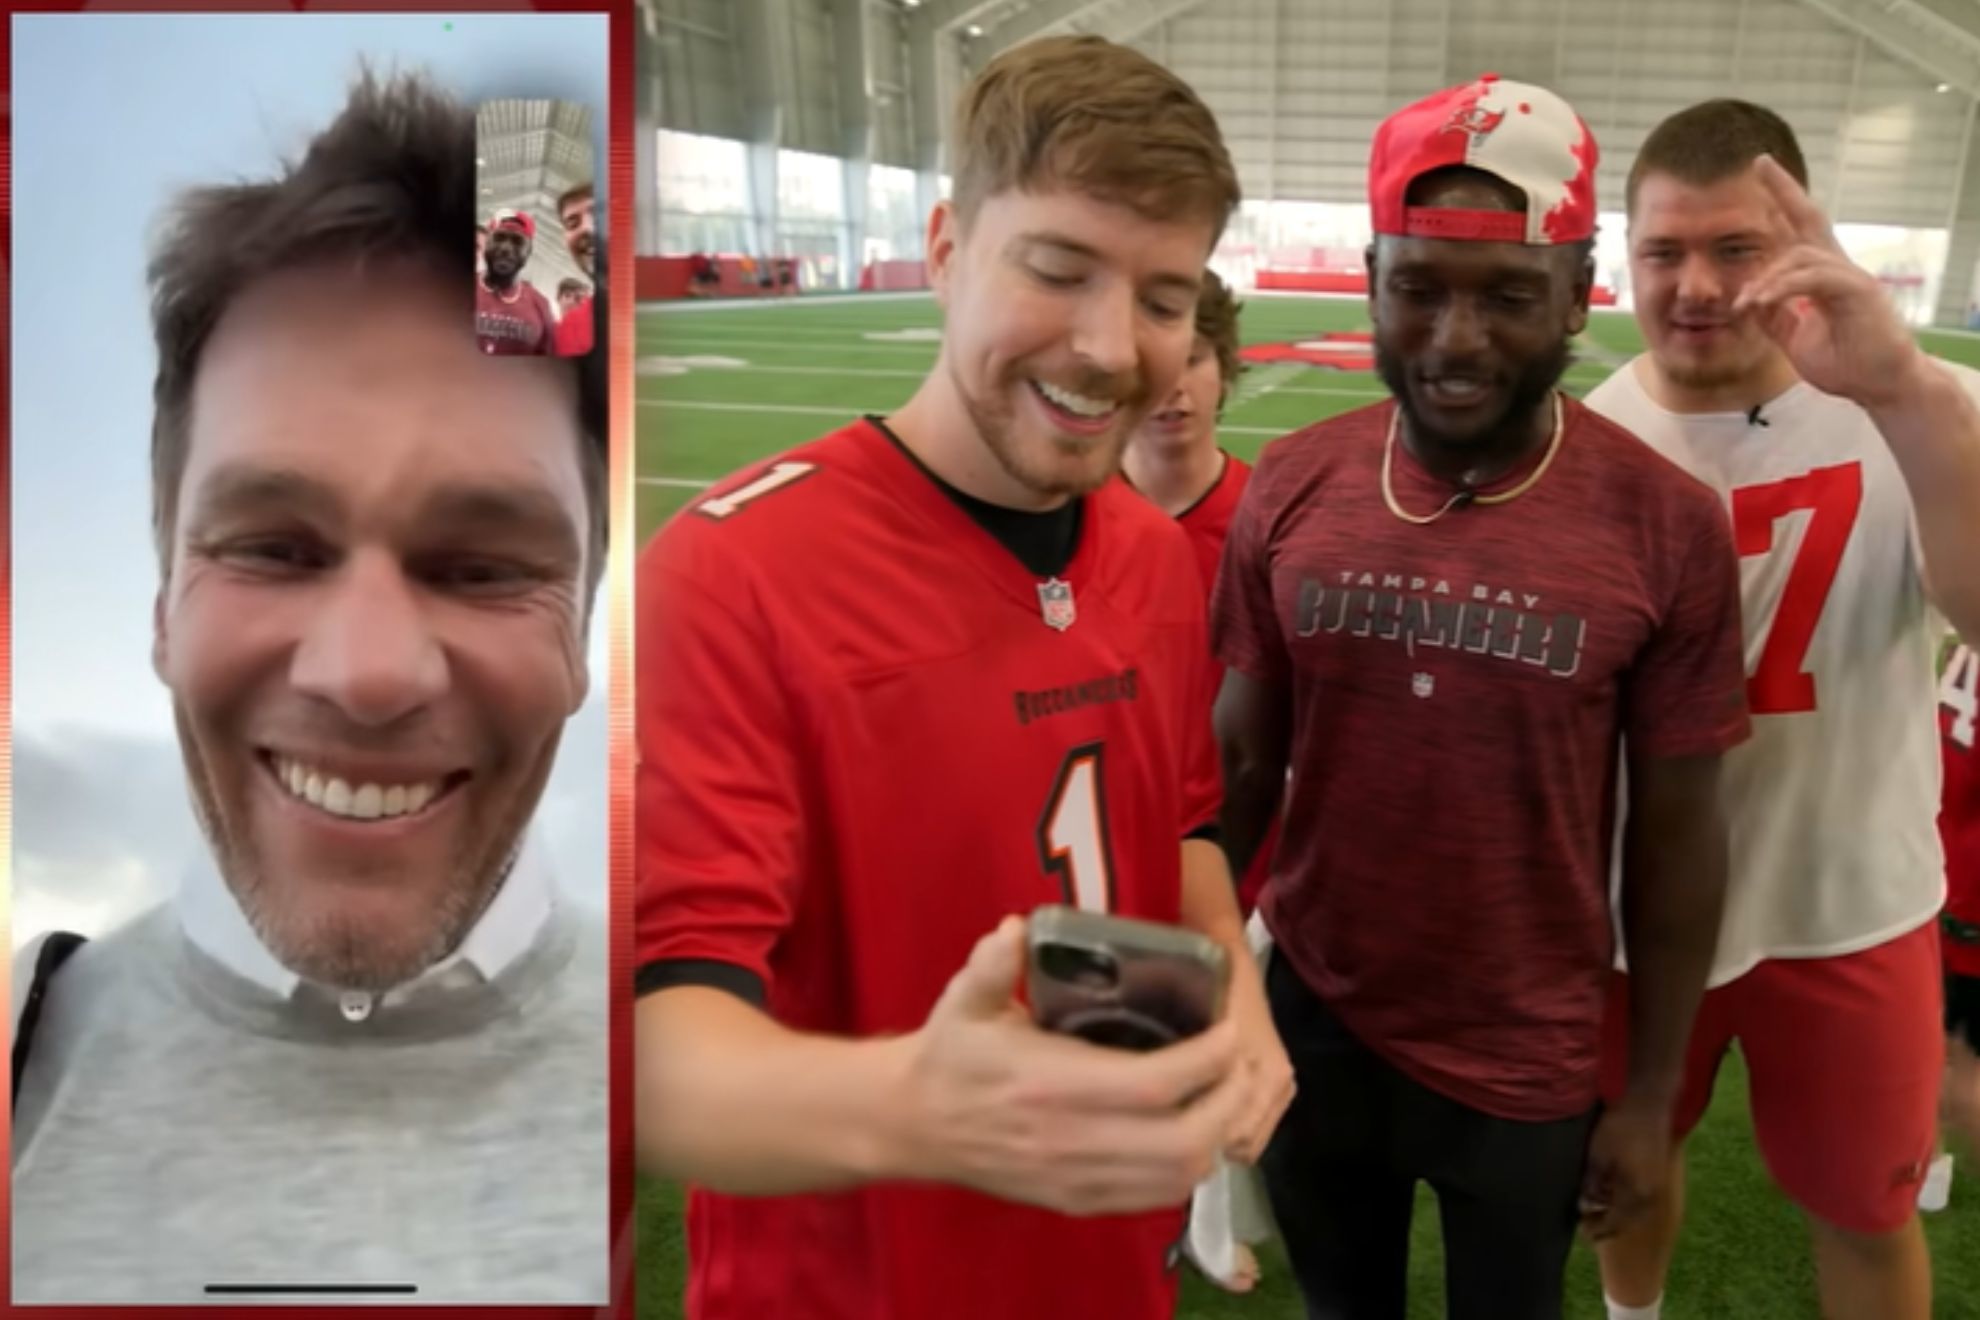 MrBeast signs $10 million contract with Buccaneers to become a real NFL player